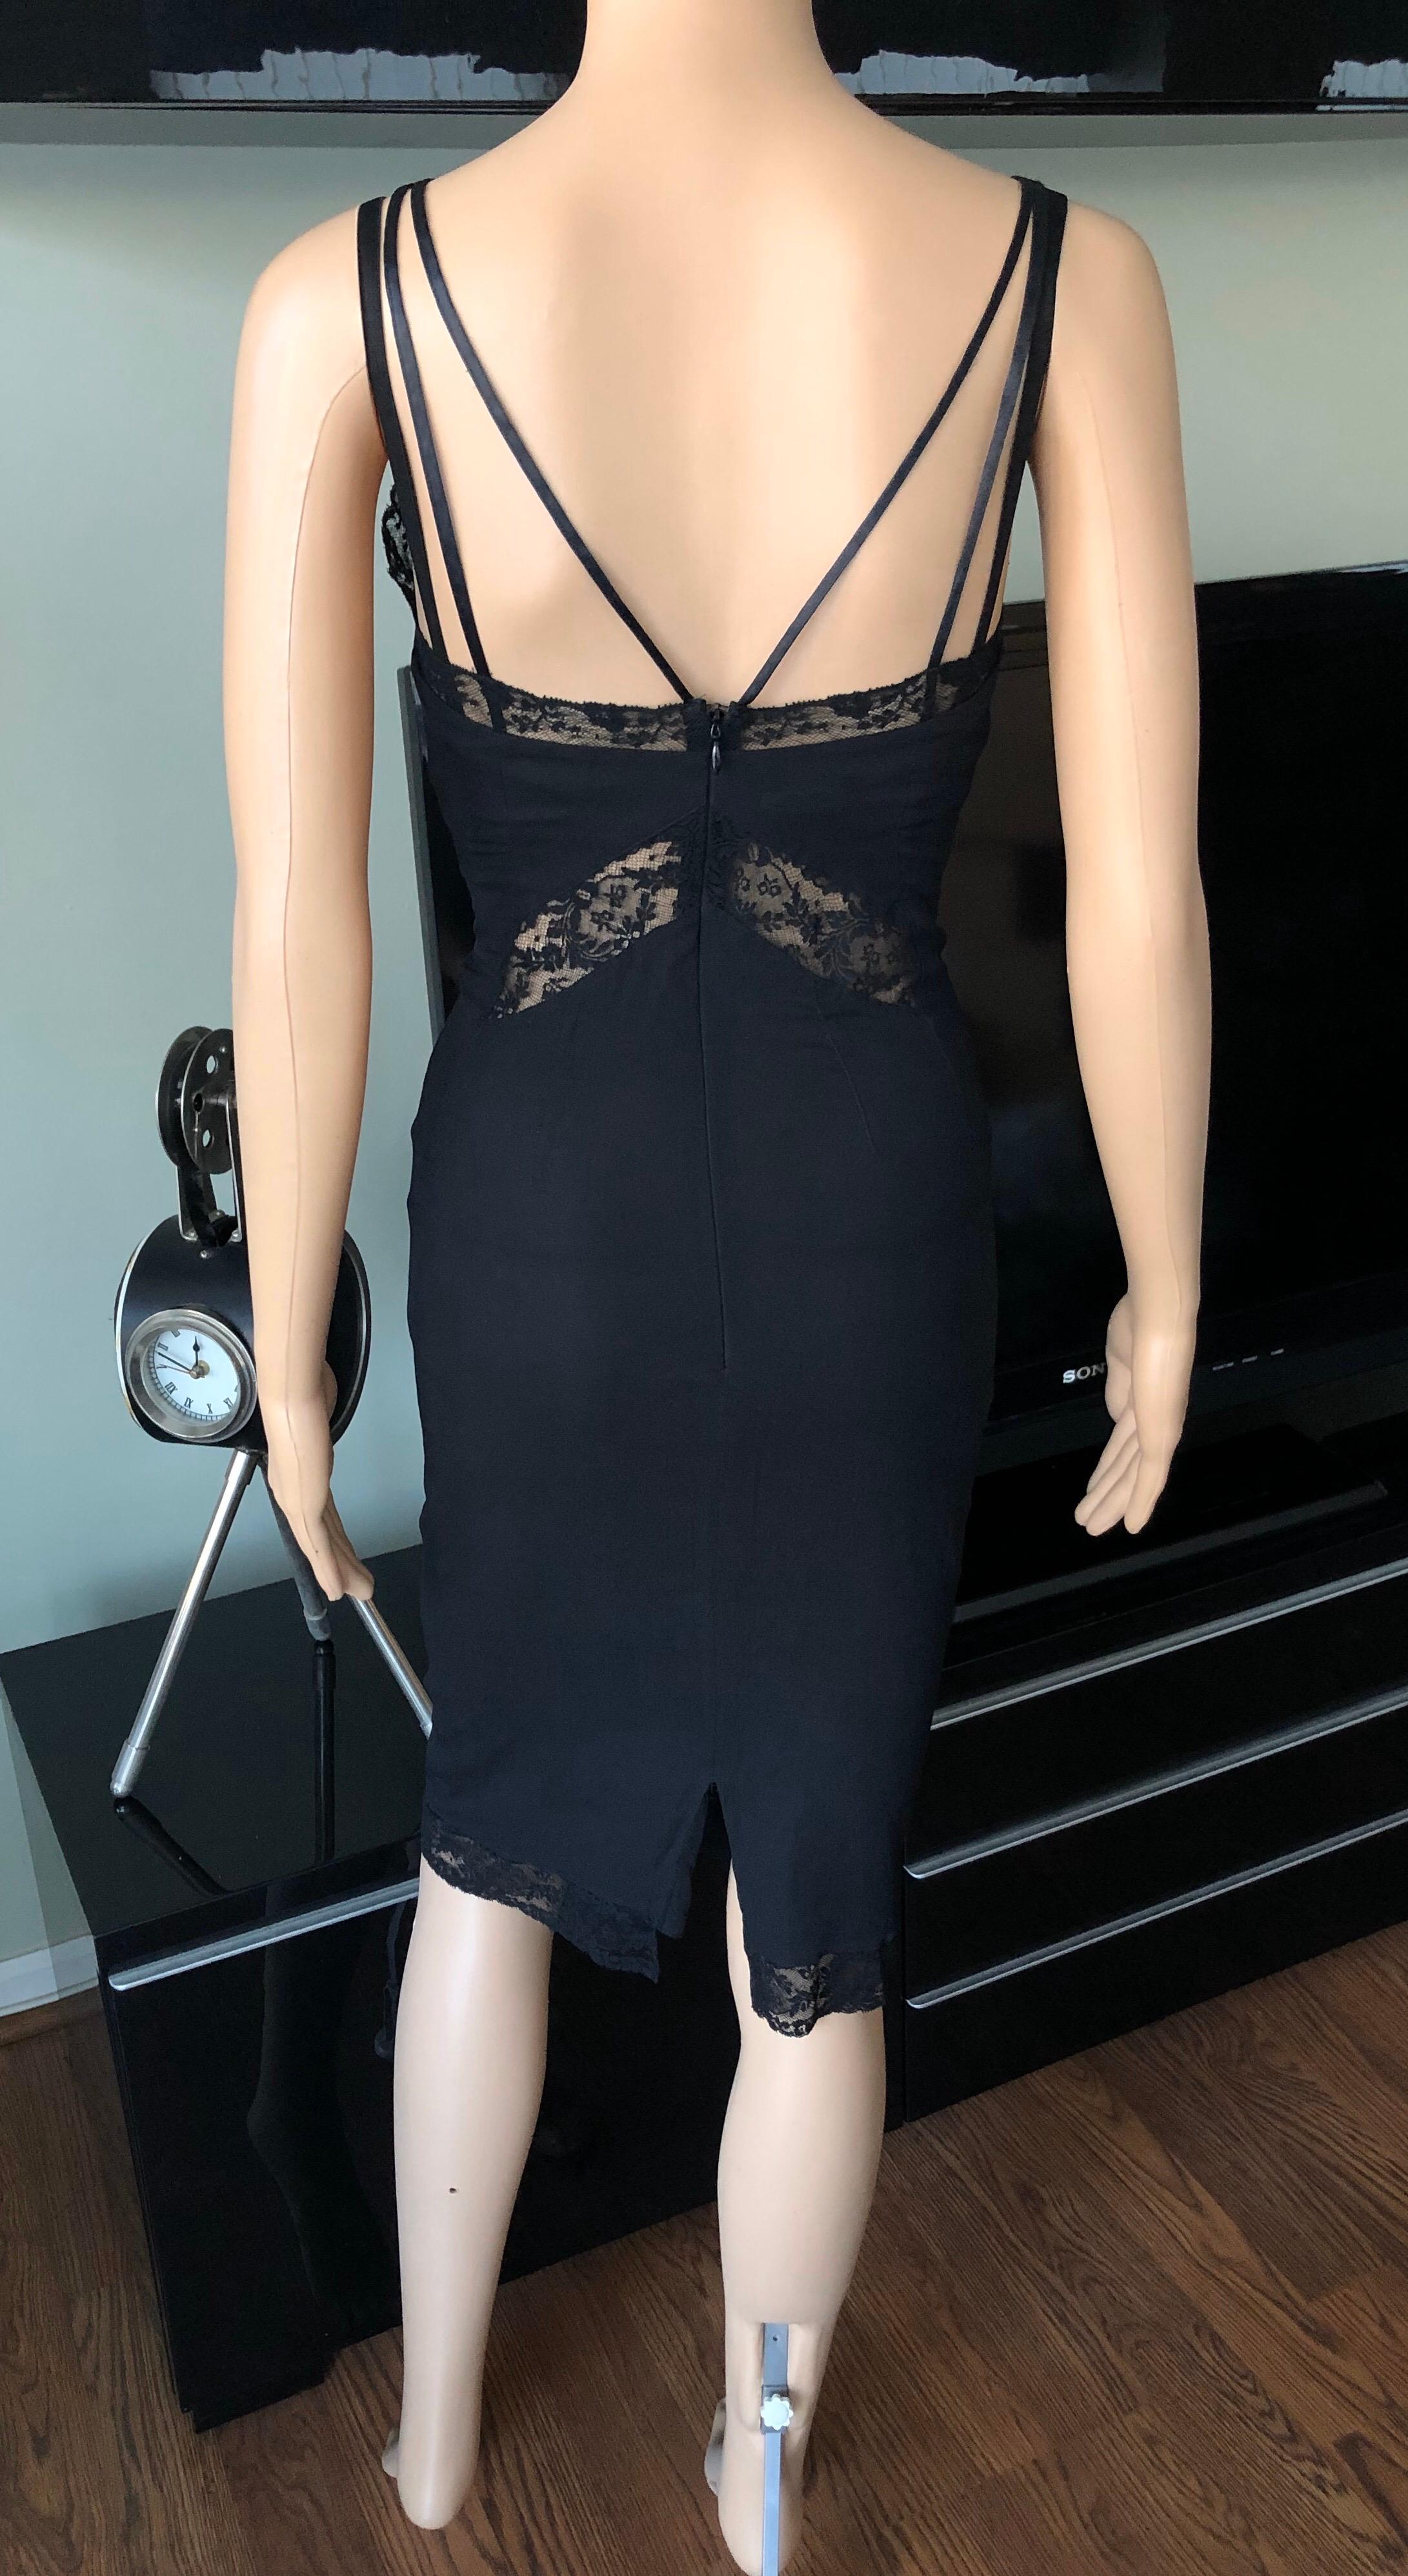 D&G by Dolce & Gabbana c. 2001 Corset Lace Up Bra Black Dress In Good Condition In Naples, FL